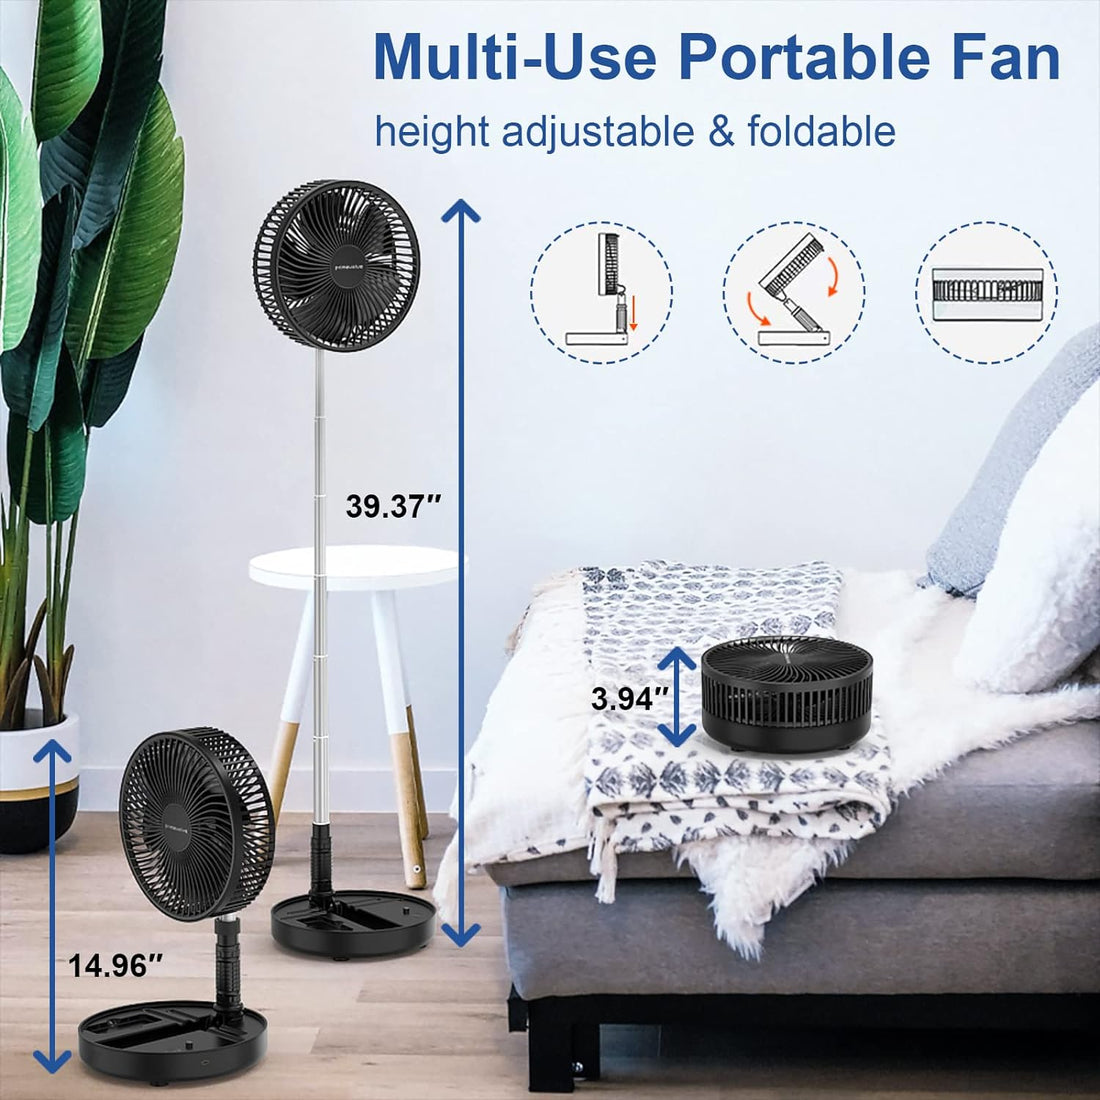 Primevolve 8.7 inch Battery Operated Fan for Bedroom with Remote, Rechargeable Portable USB Fan with Adjustable Height for Camping Tent Travel Black